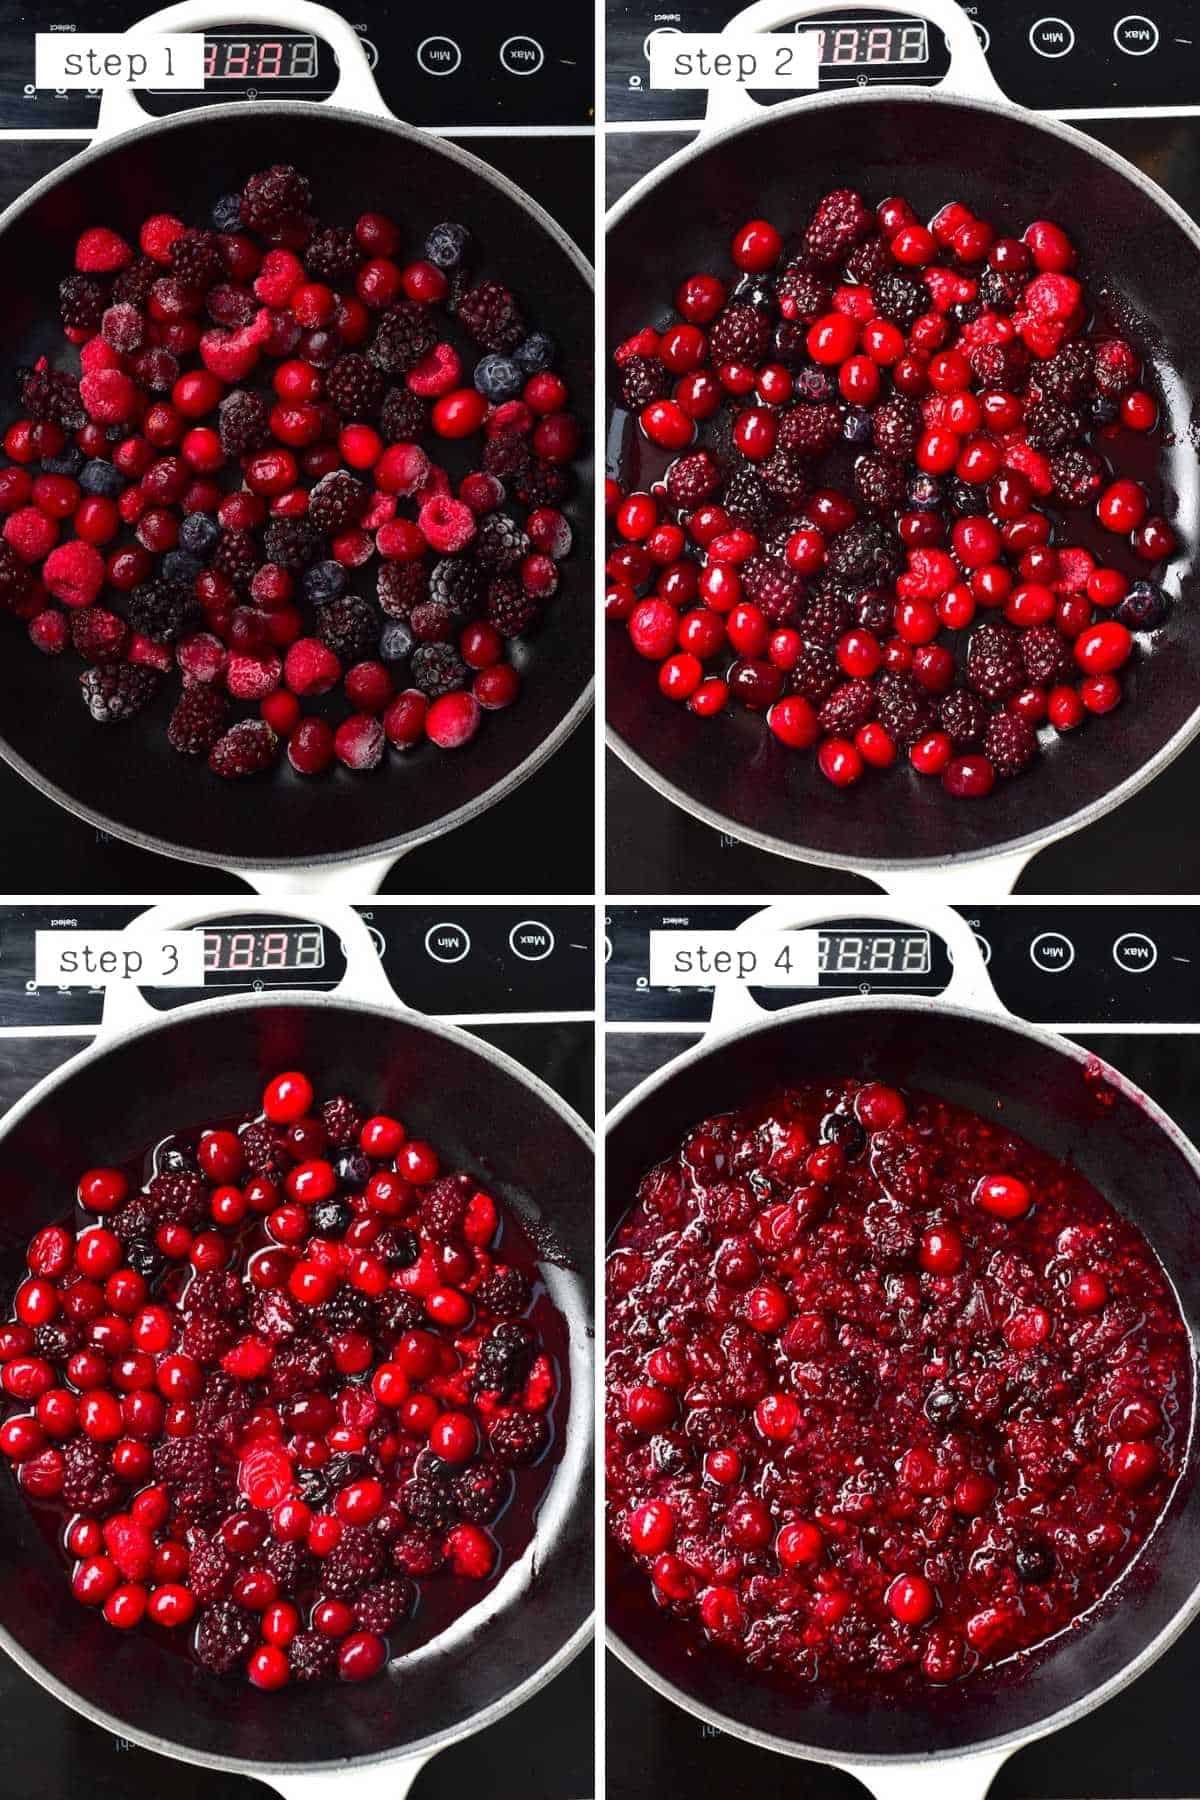 Steps for making berry compote